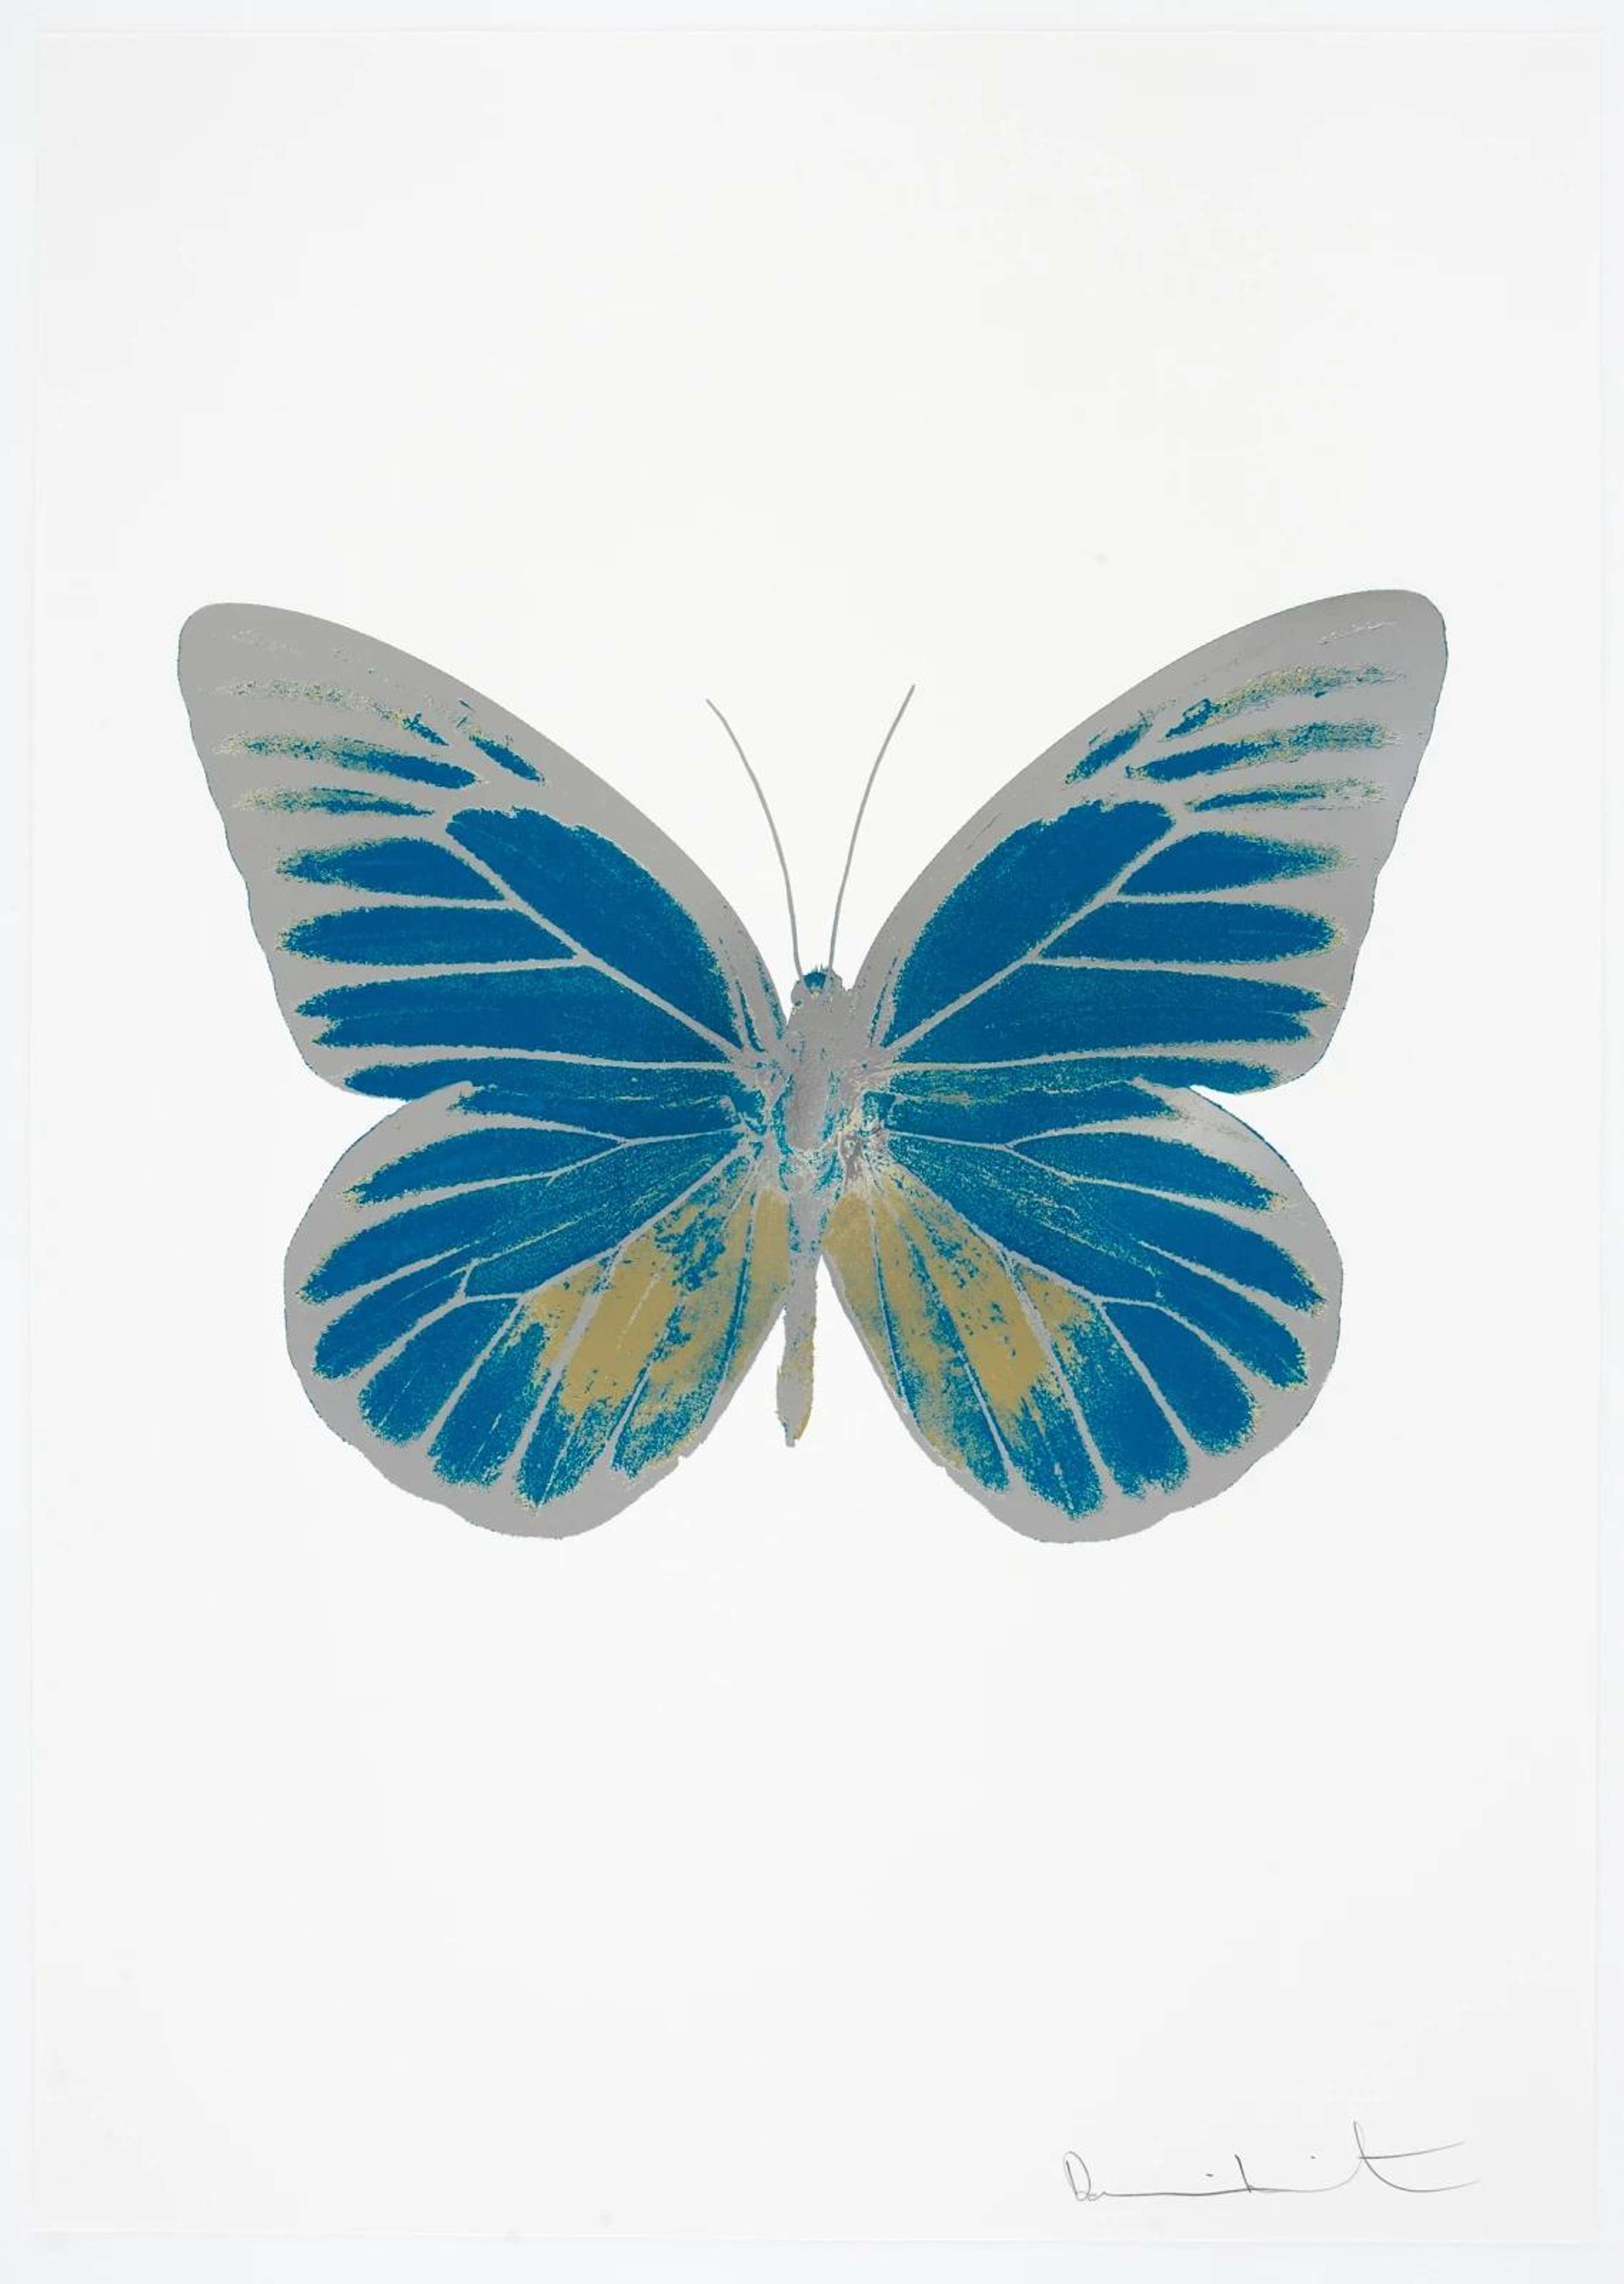 The Souls I (turquoise, cool gold, silver gloss) - Signed Print by Damien Hirst 2010 - MyArtBroker